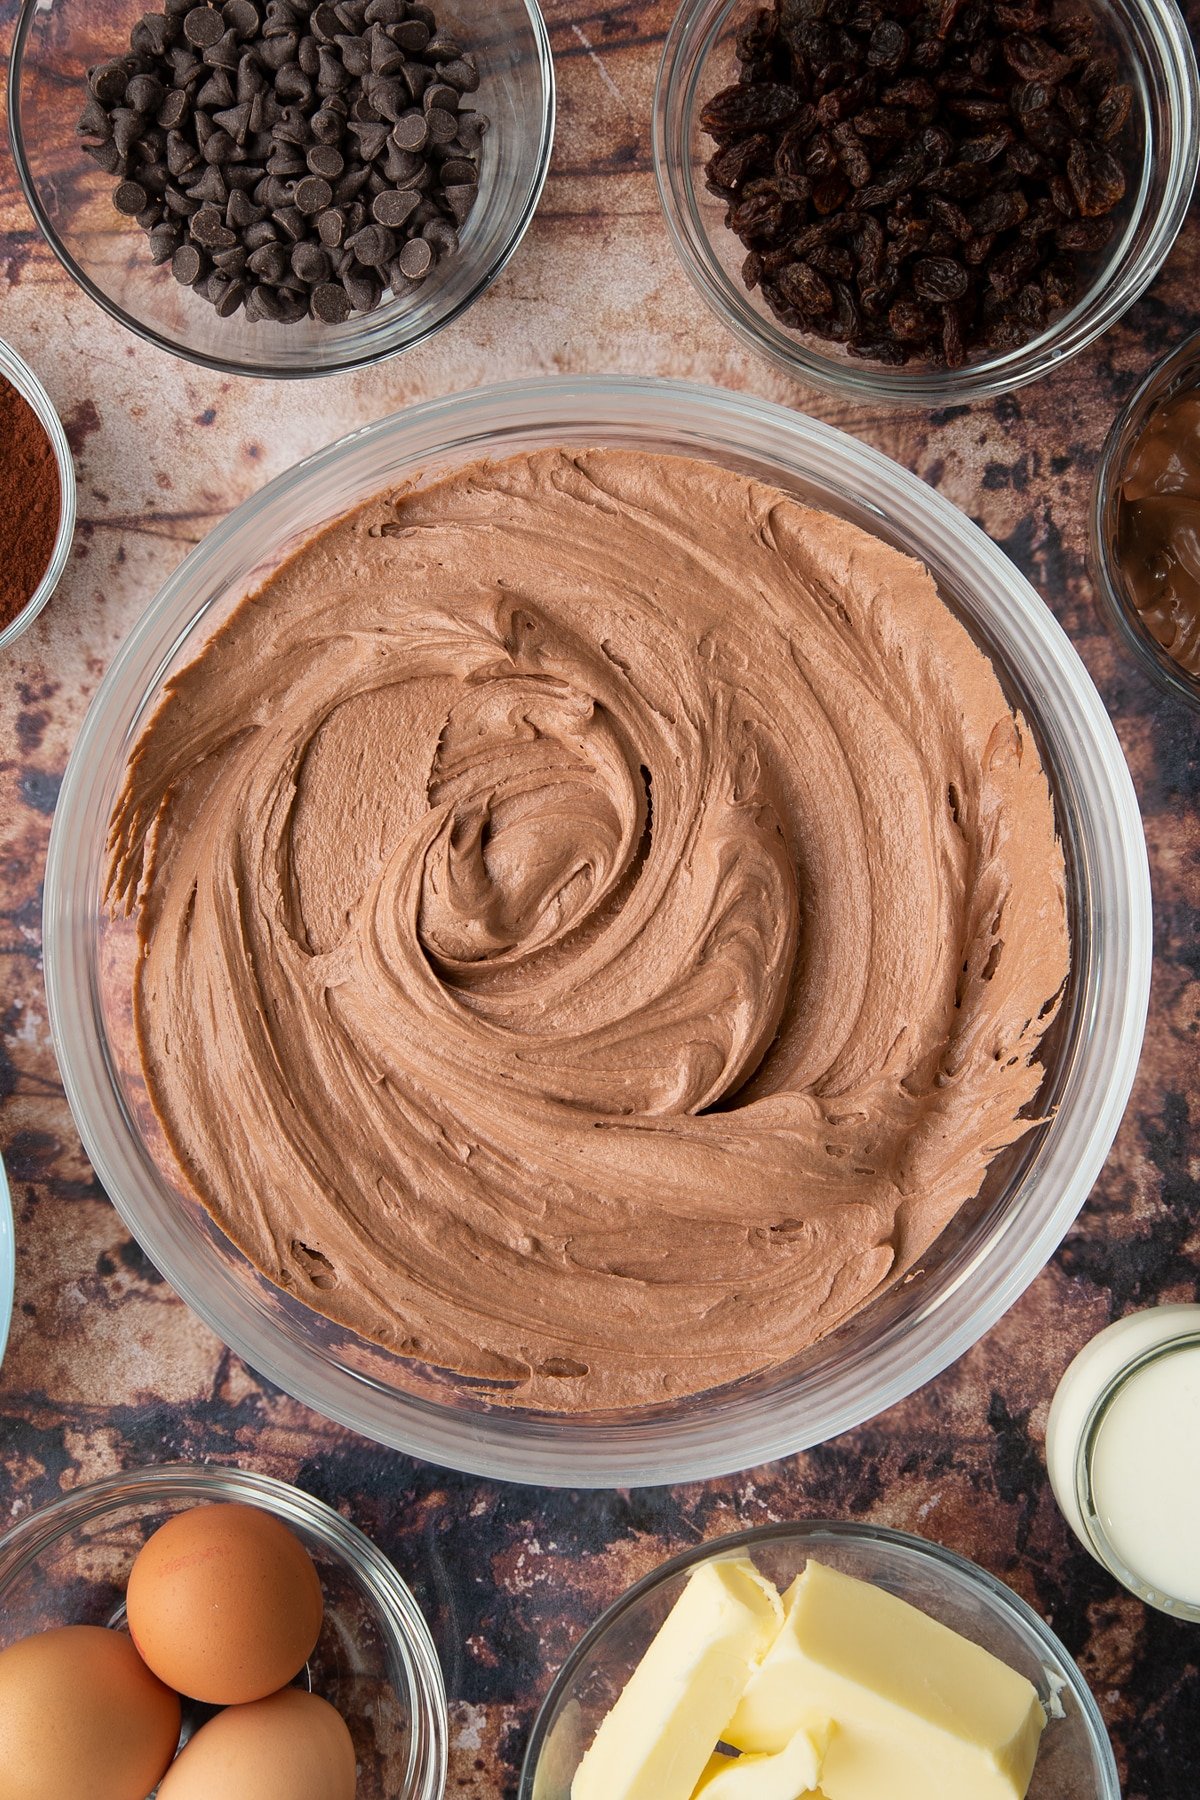 Nutella buttercream in a bowl. Ingredients to make chocolate raisin muffins surround the bowl.